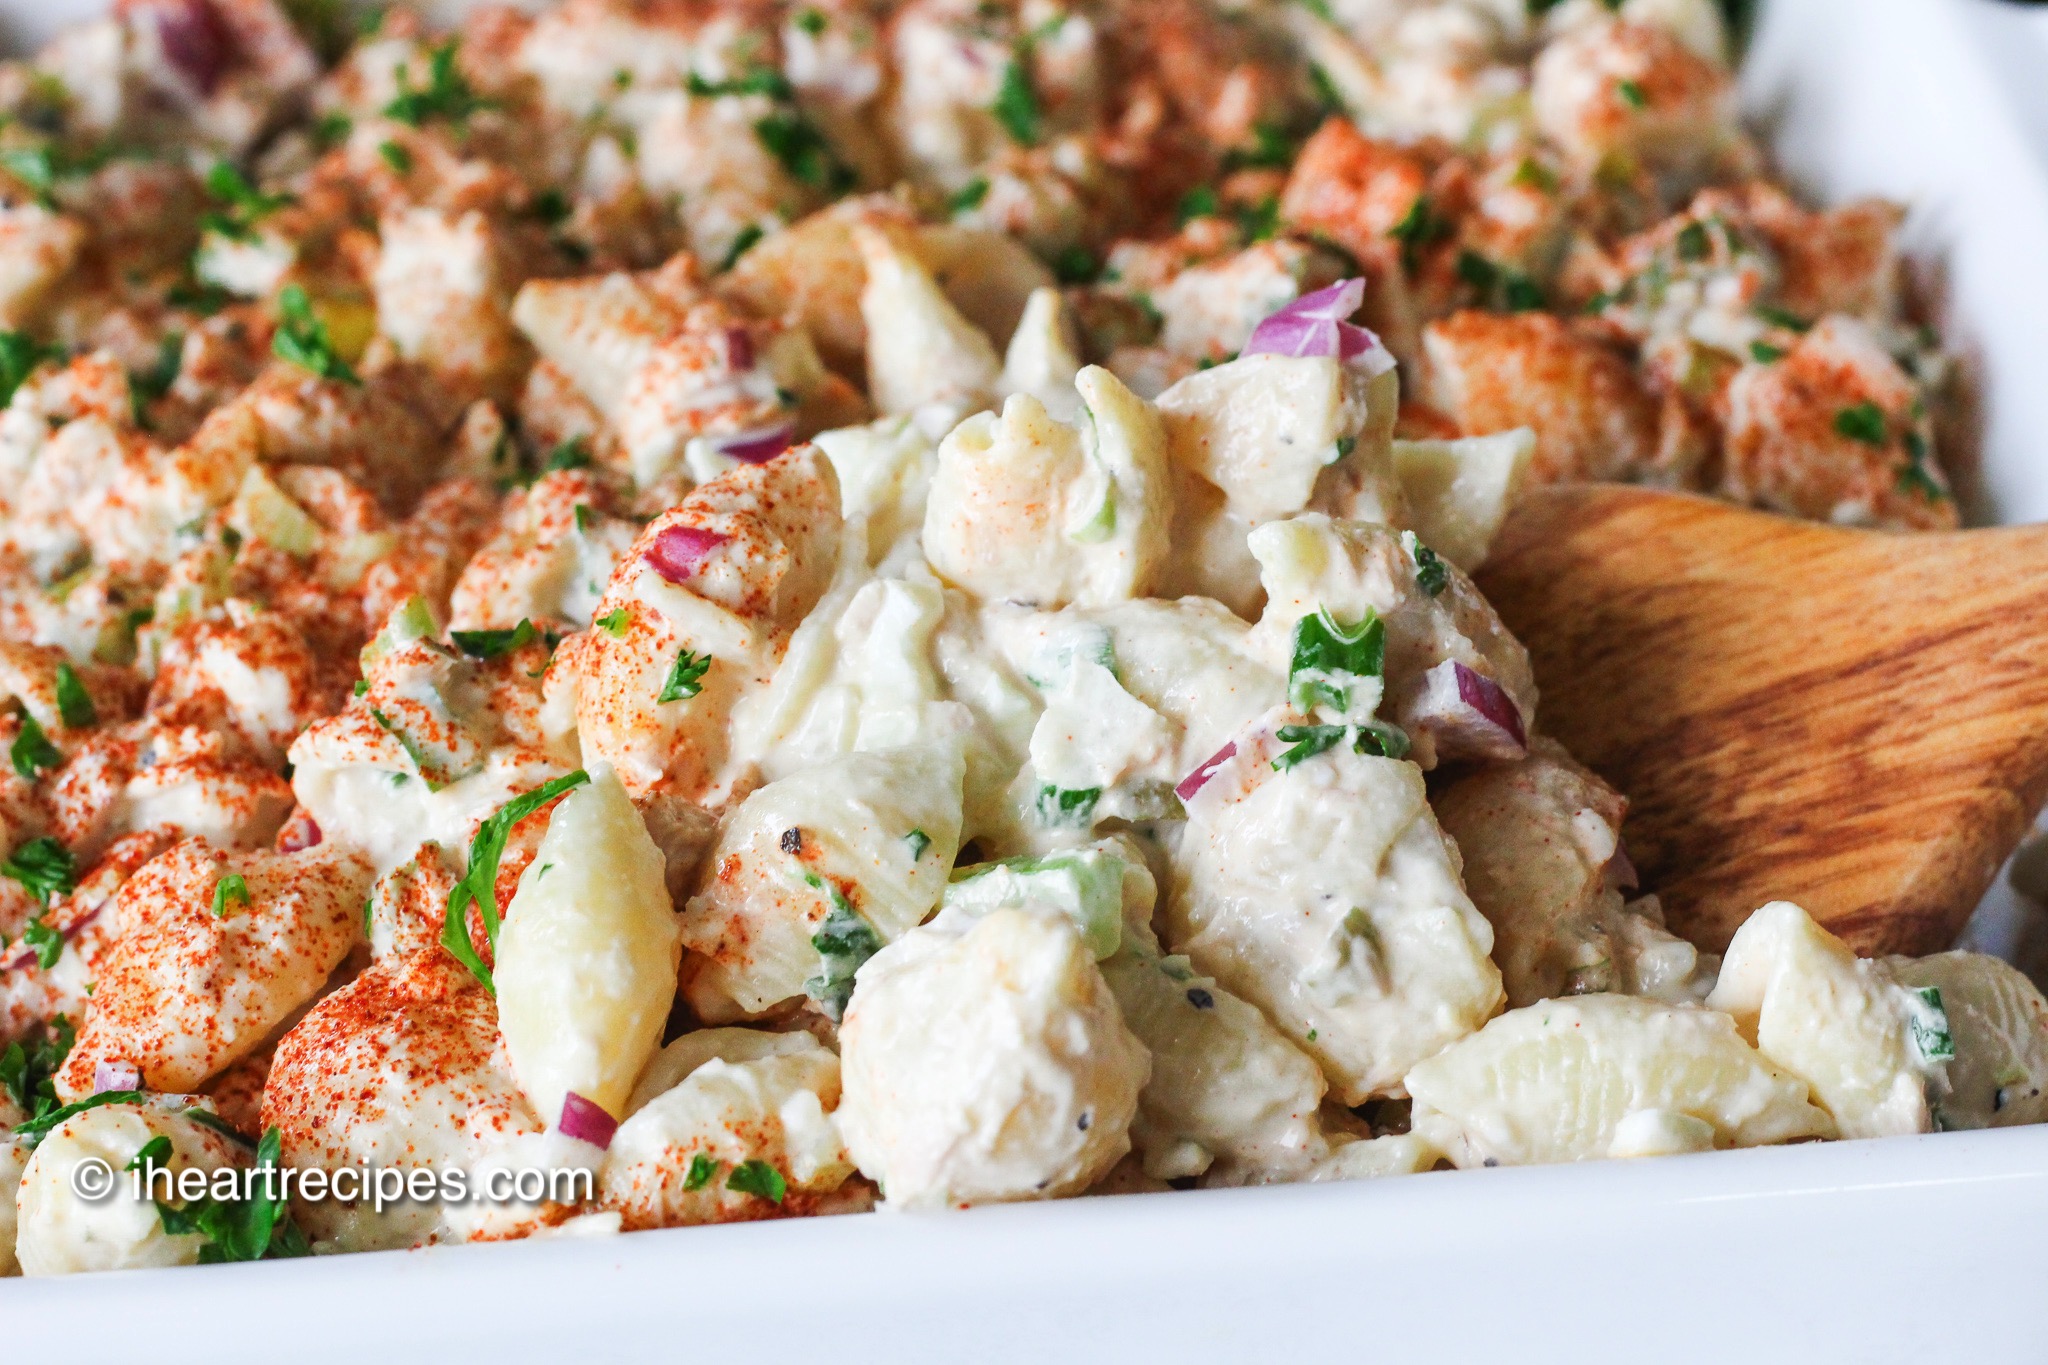 A close-up image of creamy tuna pasta salad—cooked pasta mixed with veggies and seasonings in a creamy mayo dressing.